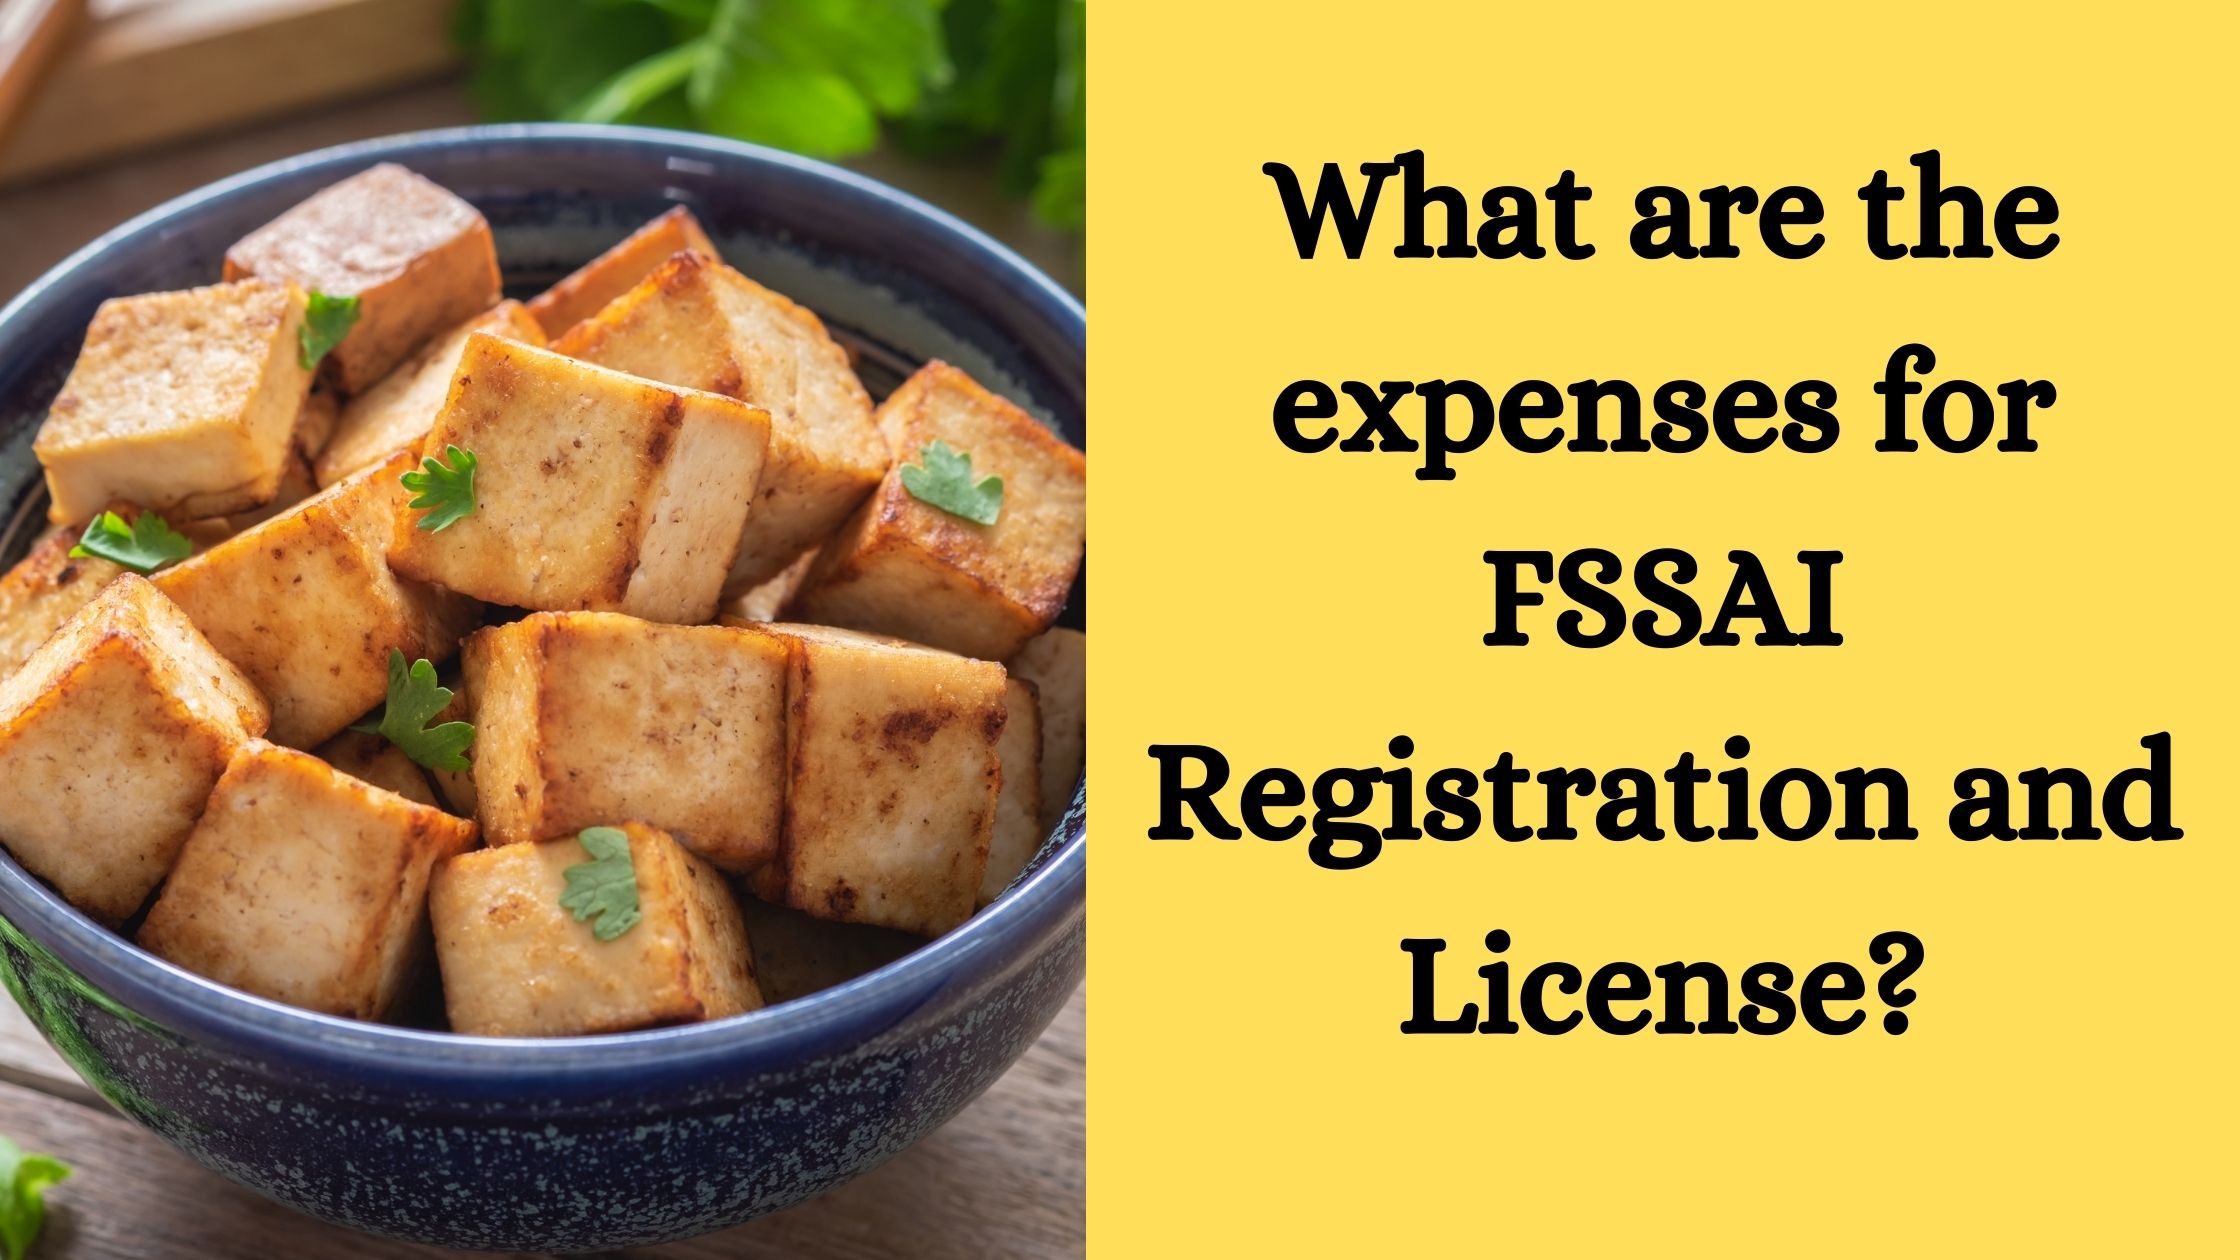 What are the expenses for FSSAI Registration and License?￼